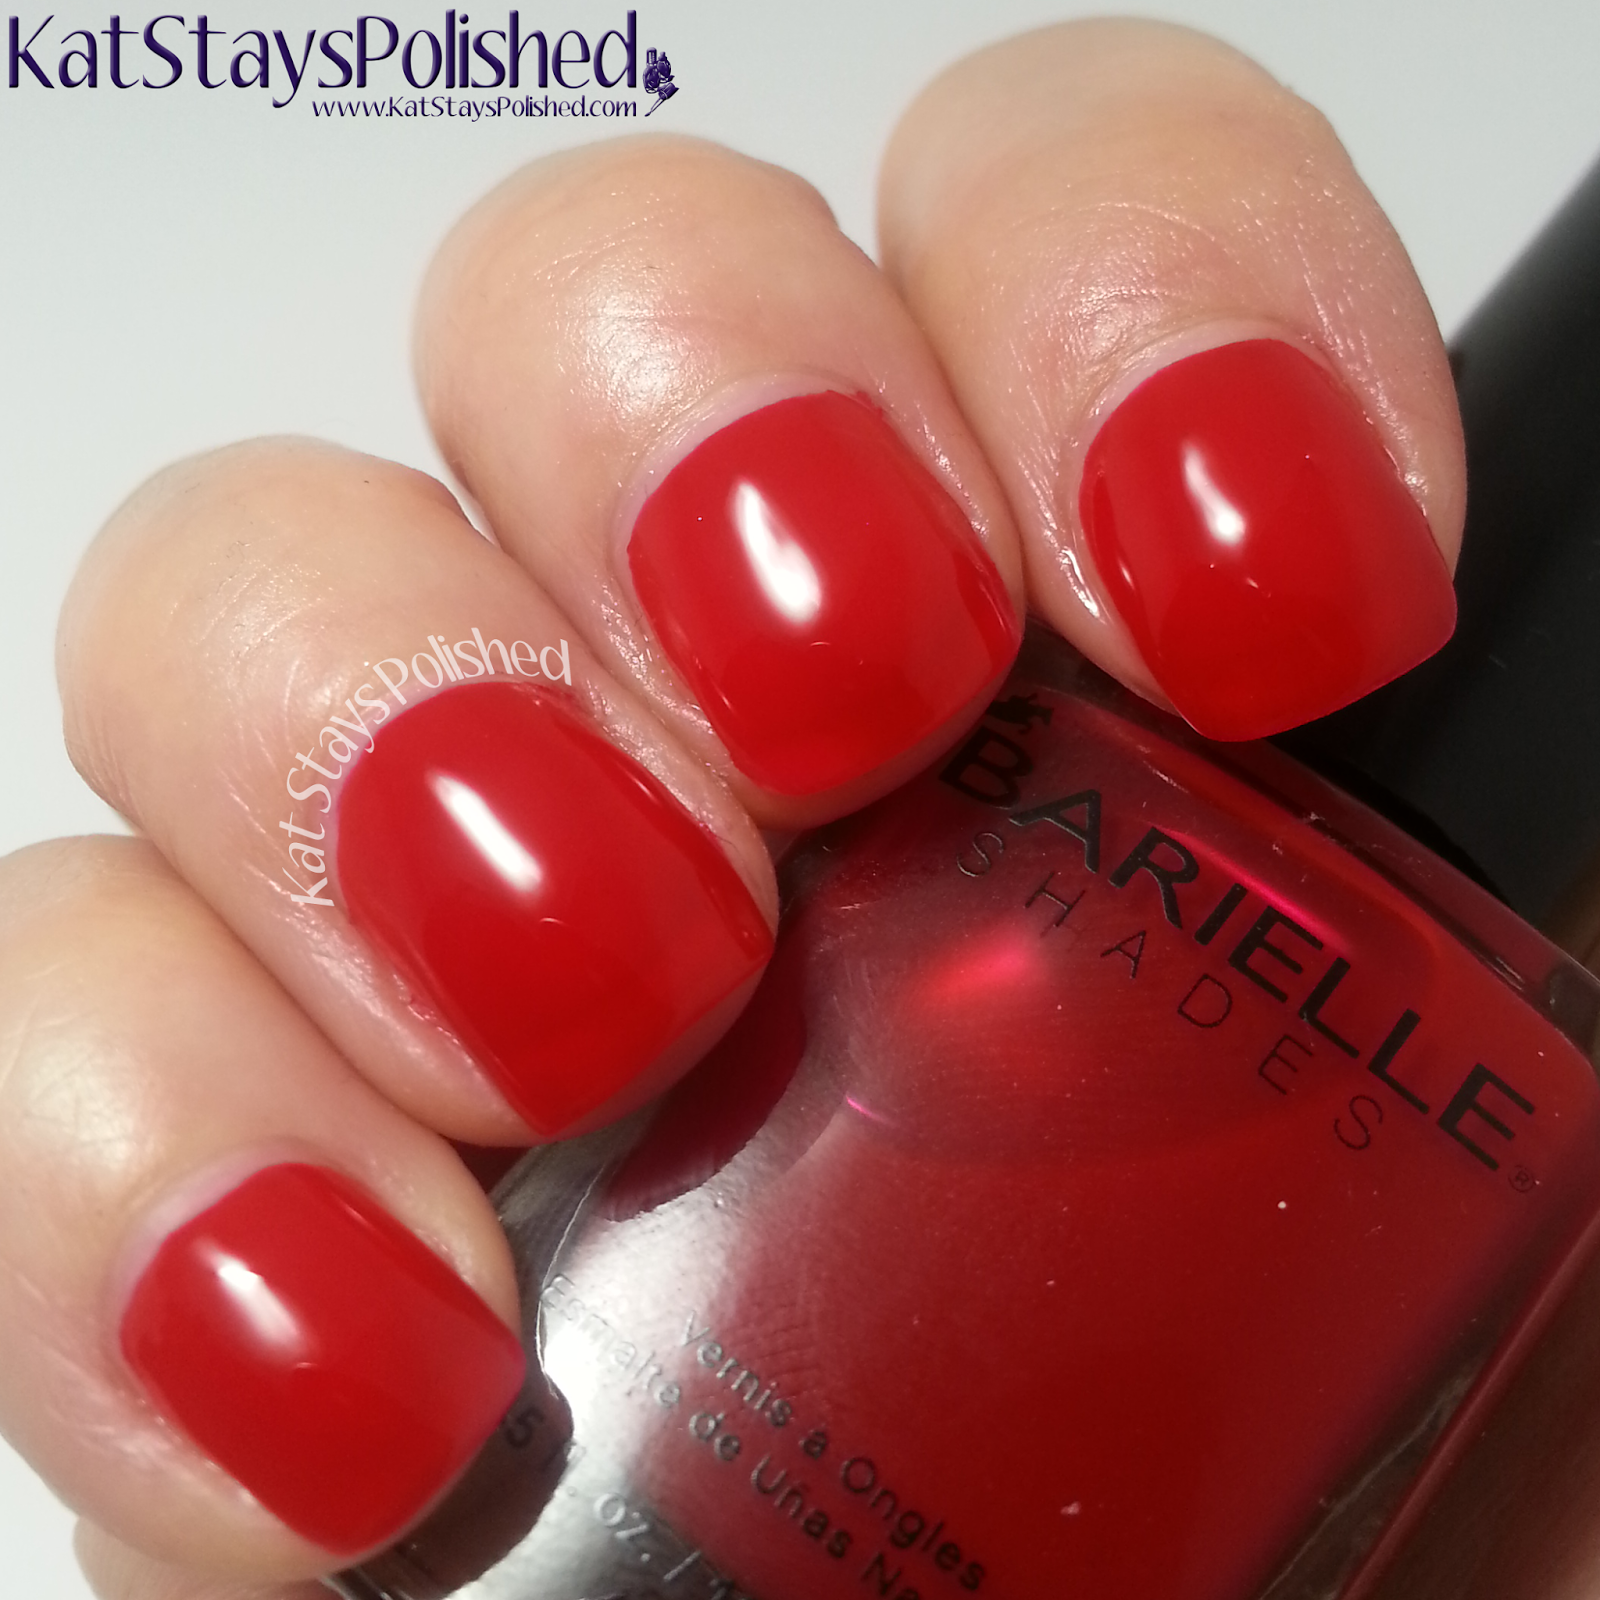 Barielle Keys Collection - Summer 2014 - Miami Heat | Kat Stays Polished